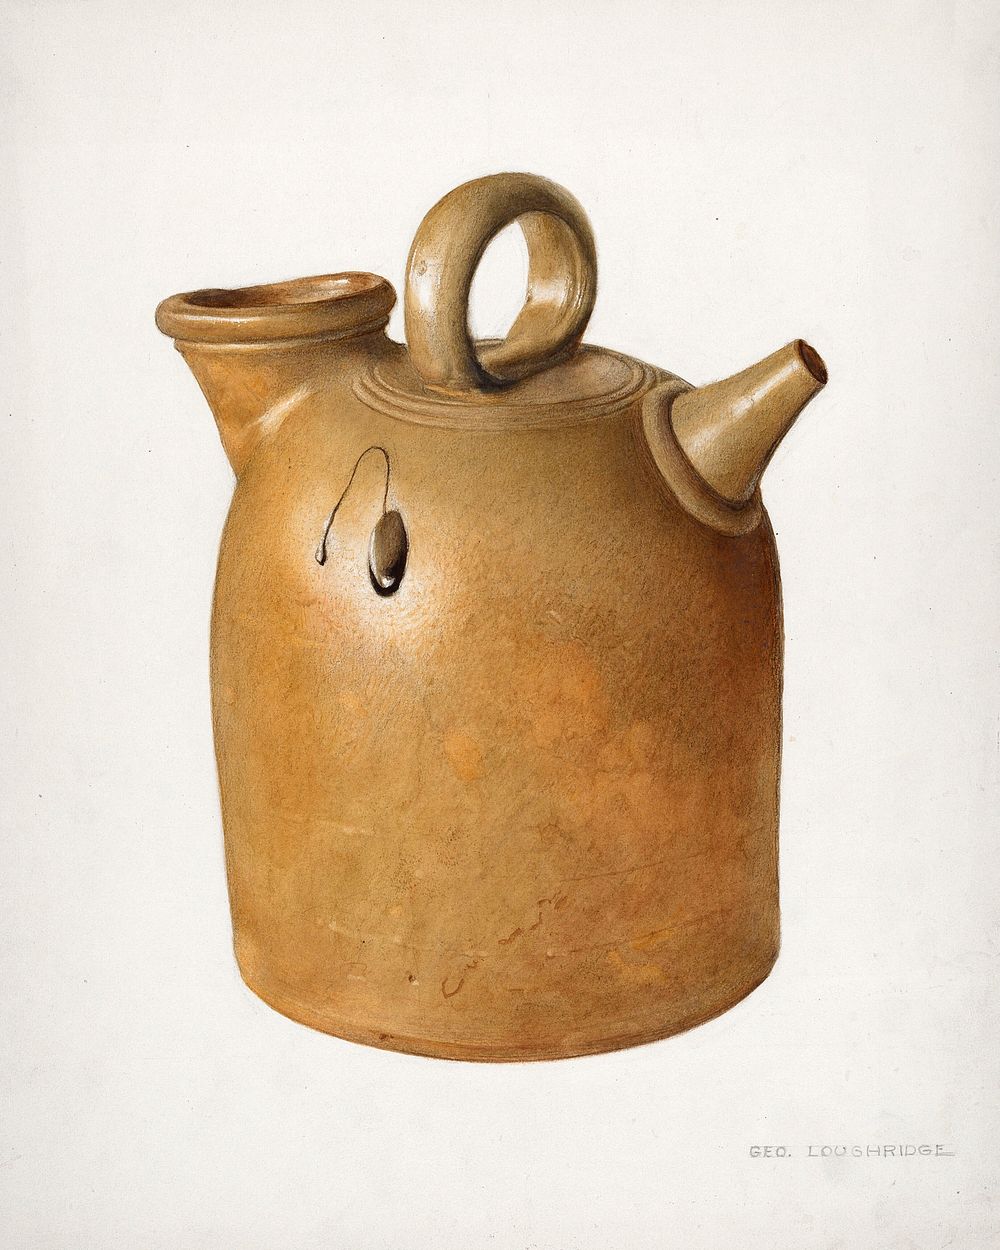 Water Jug (ca.1938) by George Loughridge. Original from The National Gallery of Art. Digitally enhanced by rawpixel.